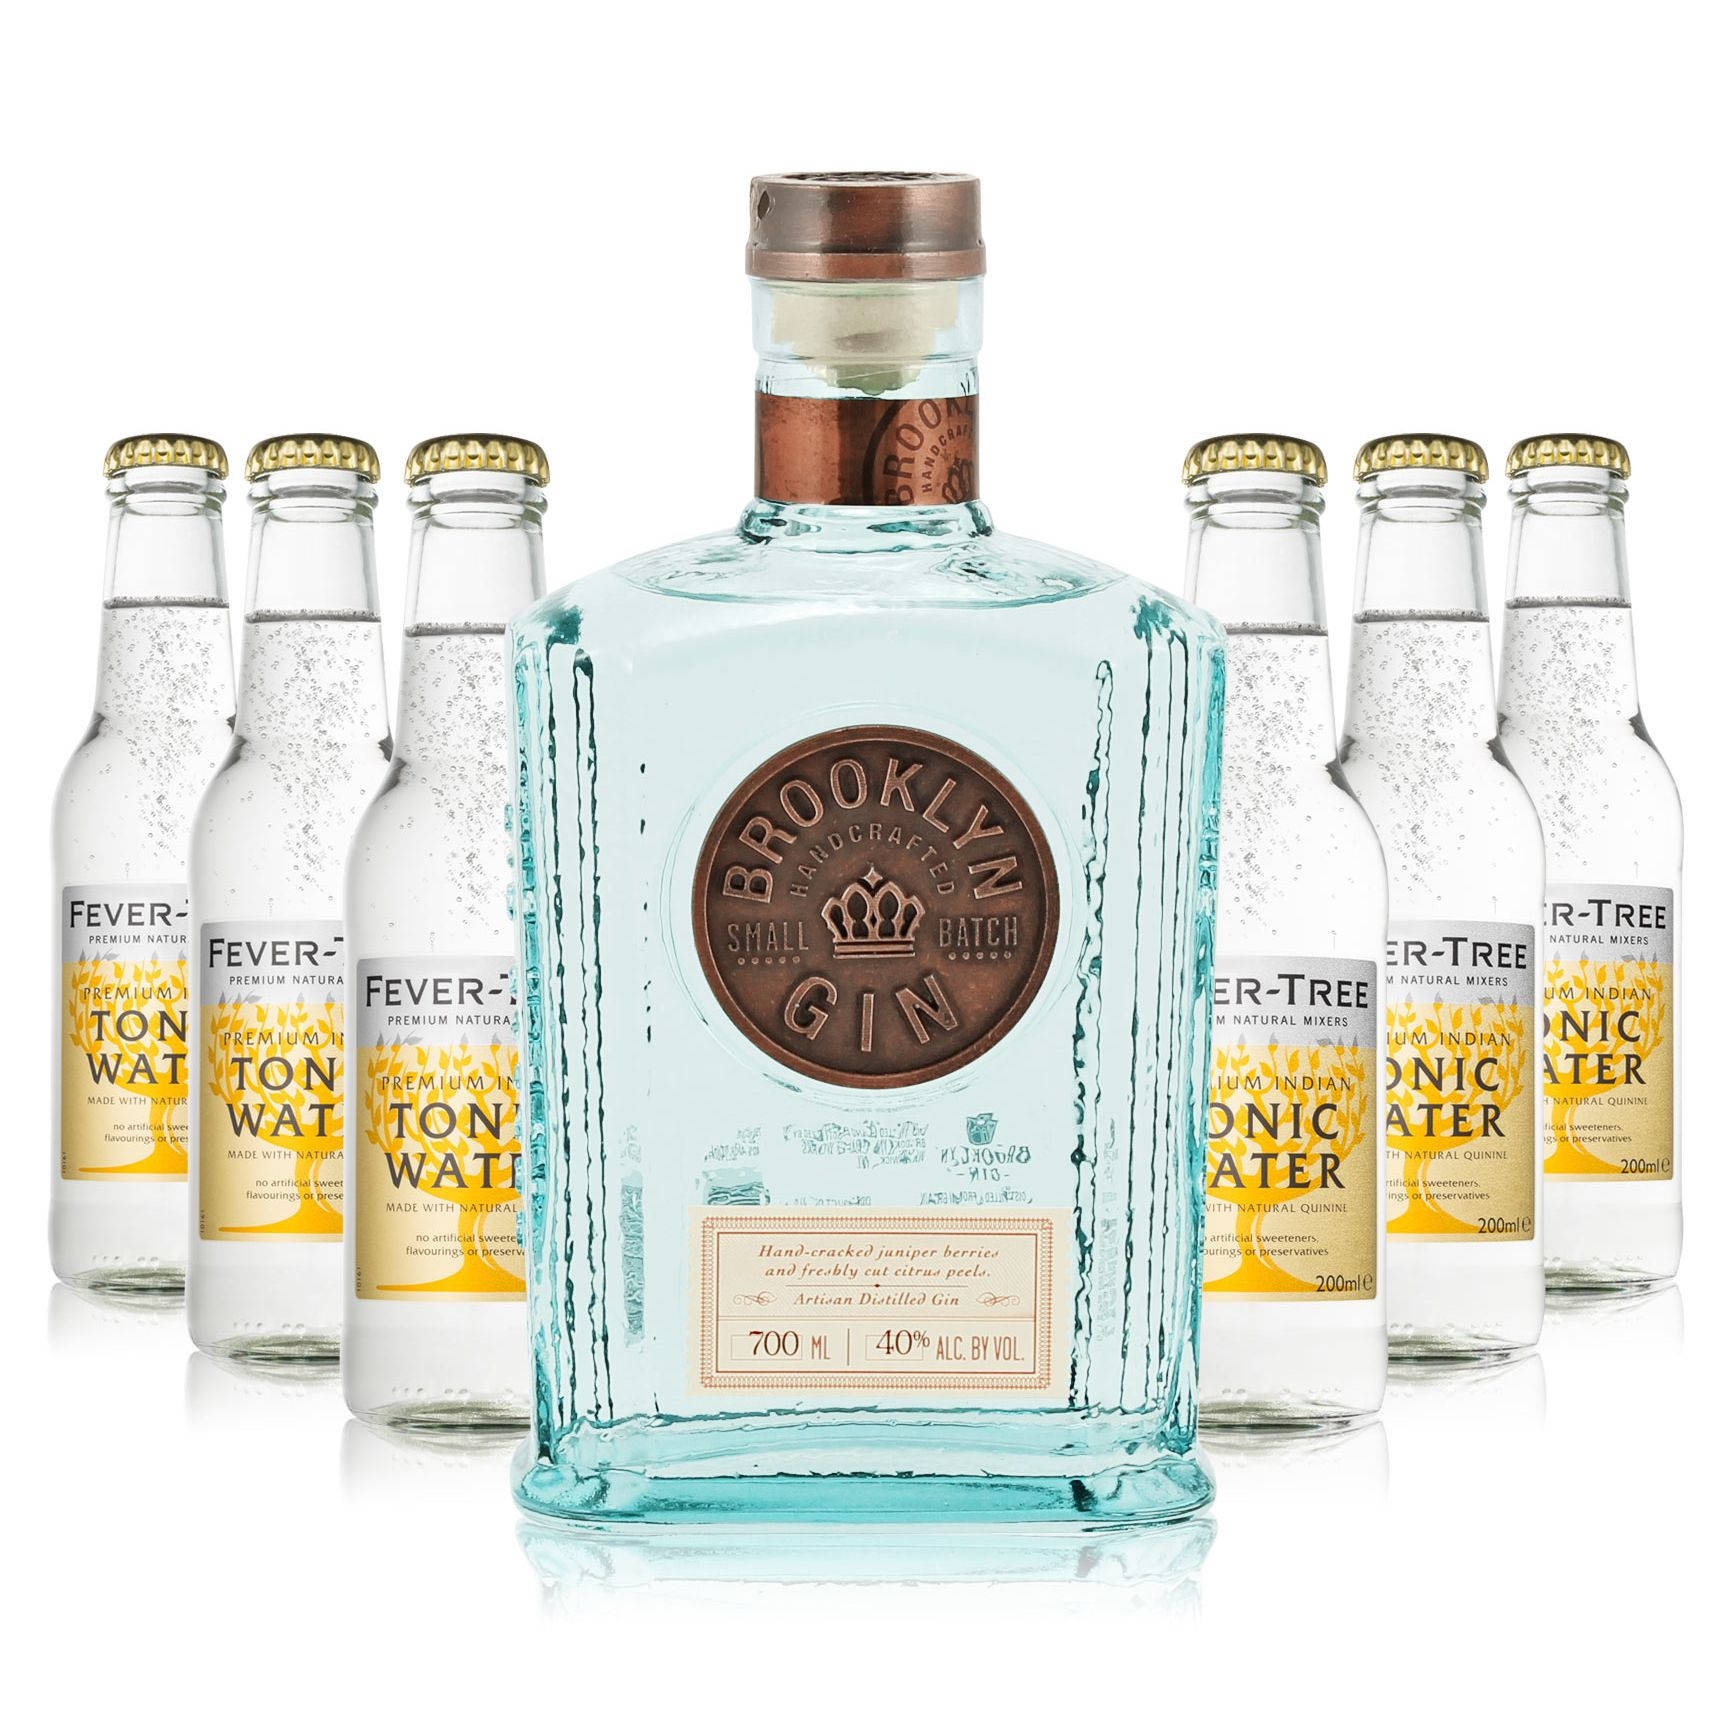 Brooklyn Gin And Six Bottles Of Fever-tree Tonic Waters Wallpaper